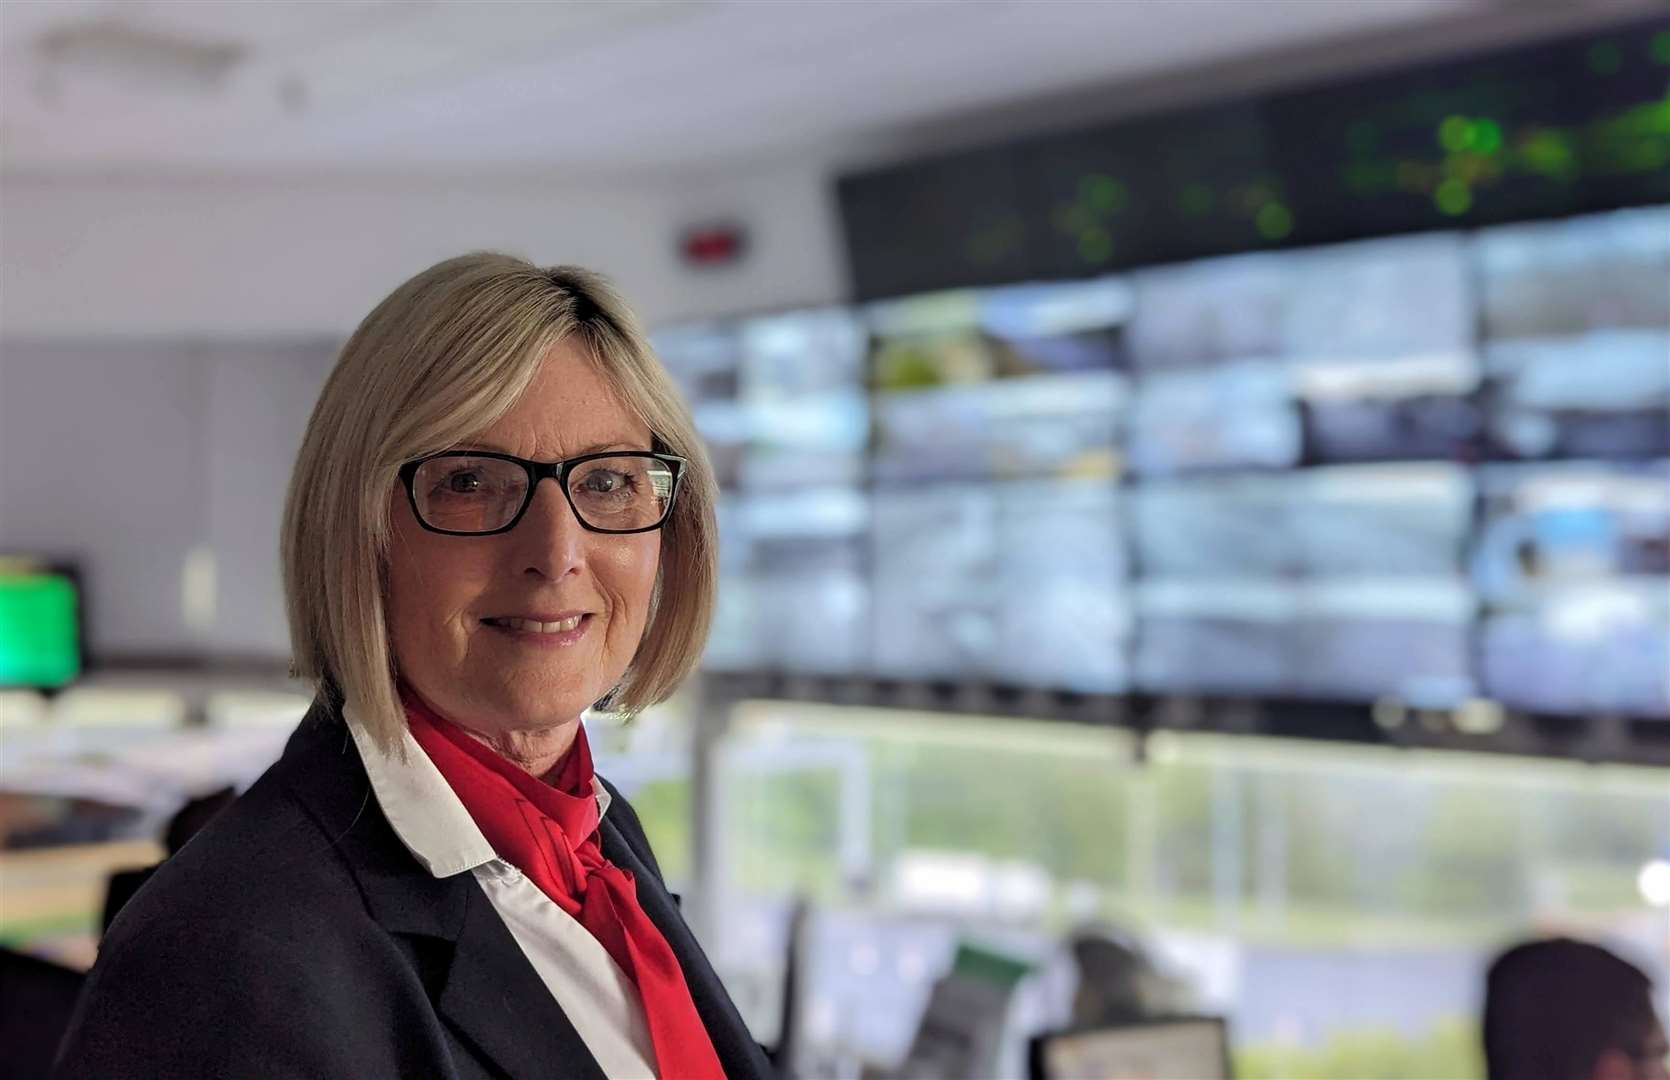 Eurotunnel Traffic Control Centre supervisor Sara Crowther